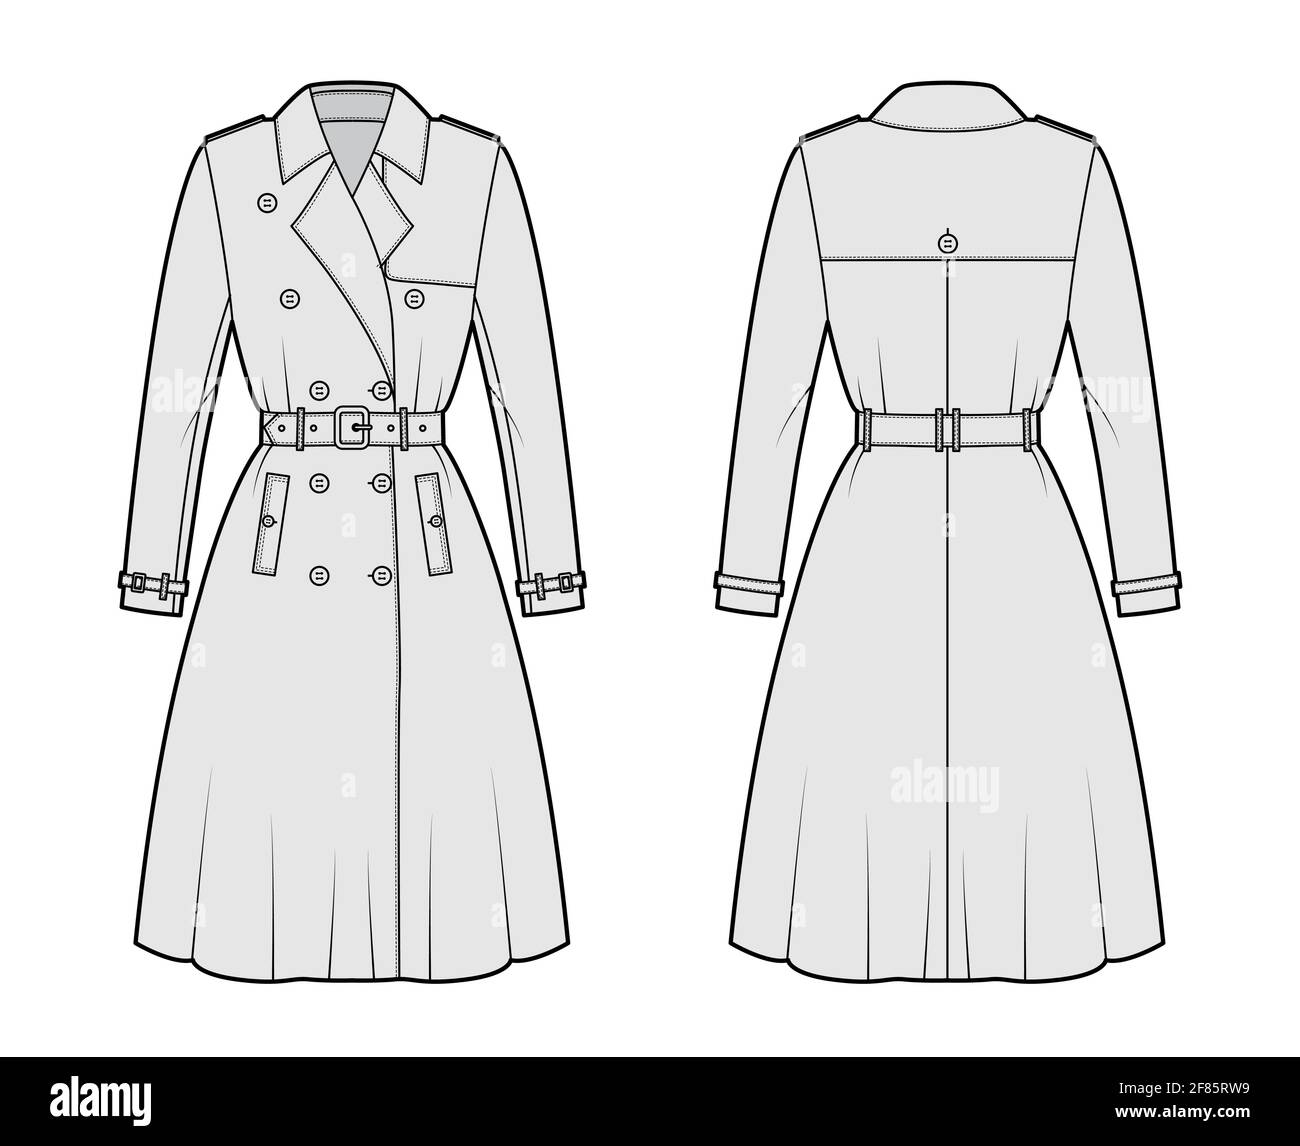 Full Trench coat technical fashion illustration with belt, double breasted, long sleeves, wide collar, knee length, storm flap. Flat template front, back, grey color style. Women, men top CAD mockup Stock Vector